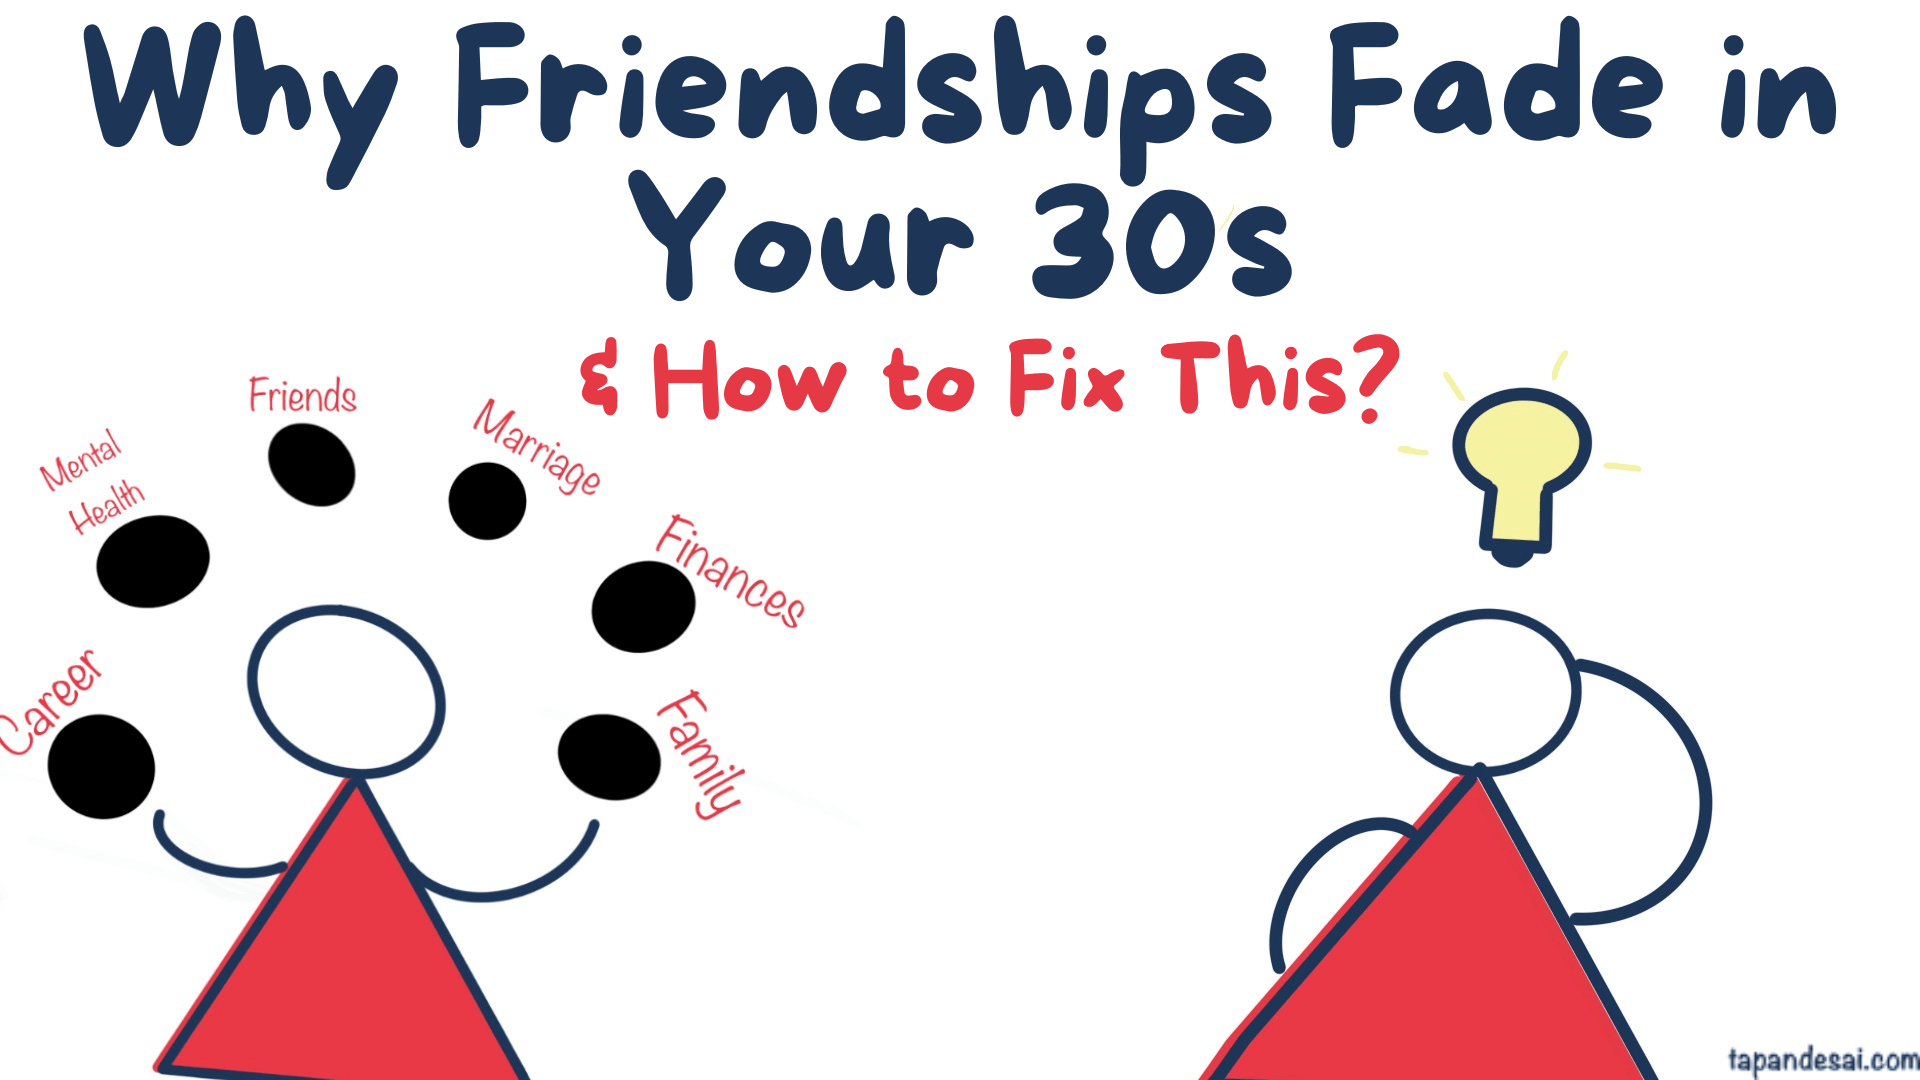 Why Friendships Fade in Your 30s & How to Keep Them Strong Using Velvet Hooks